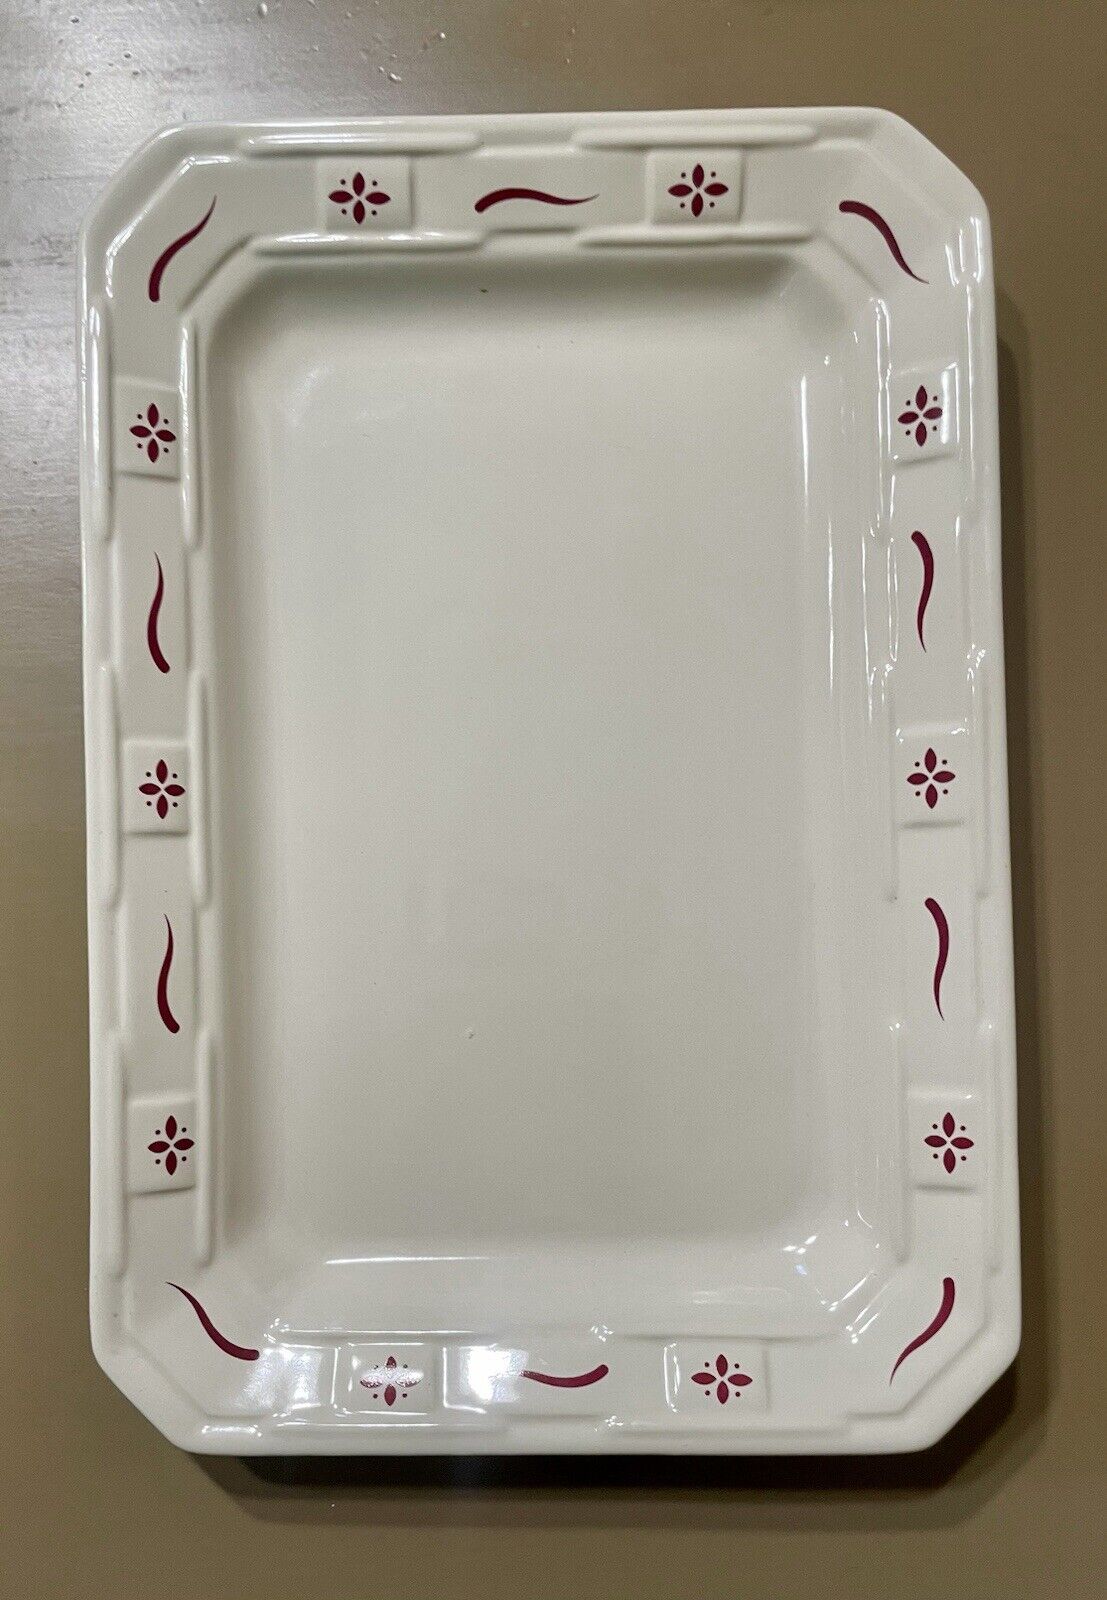 Longaberger Pottery Woven Traditions Red Rectangle Serving Tray